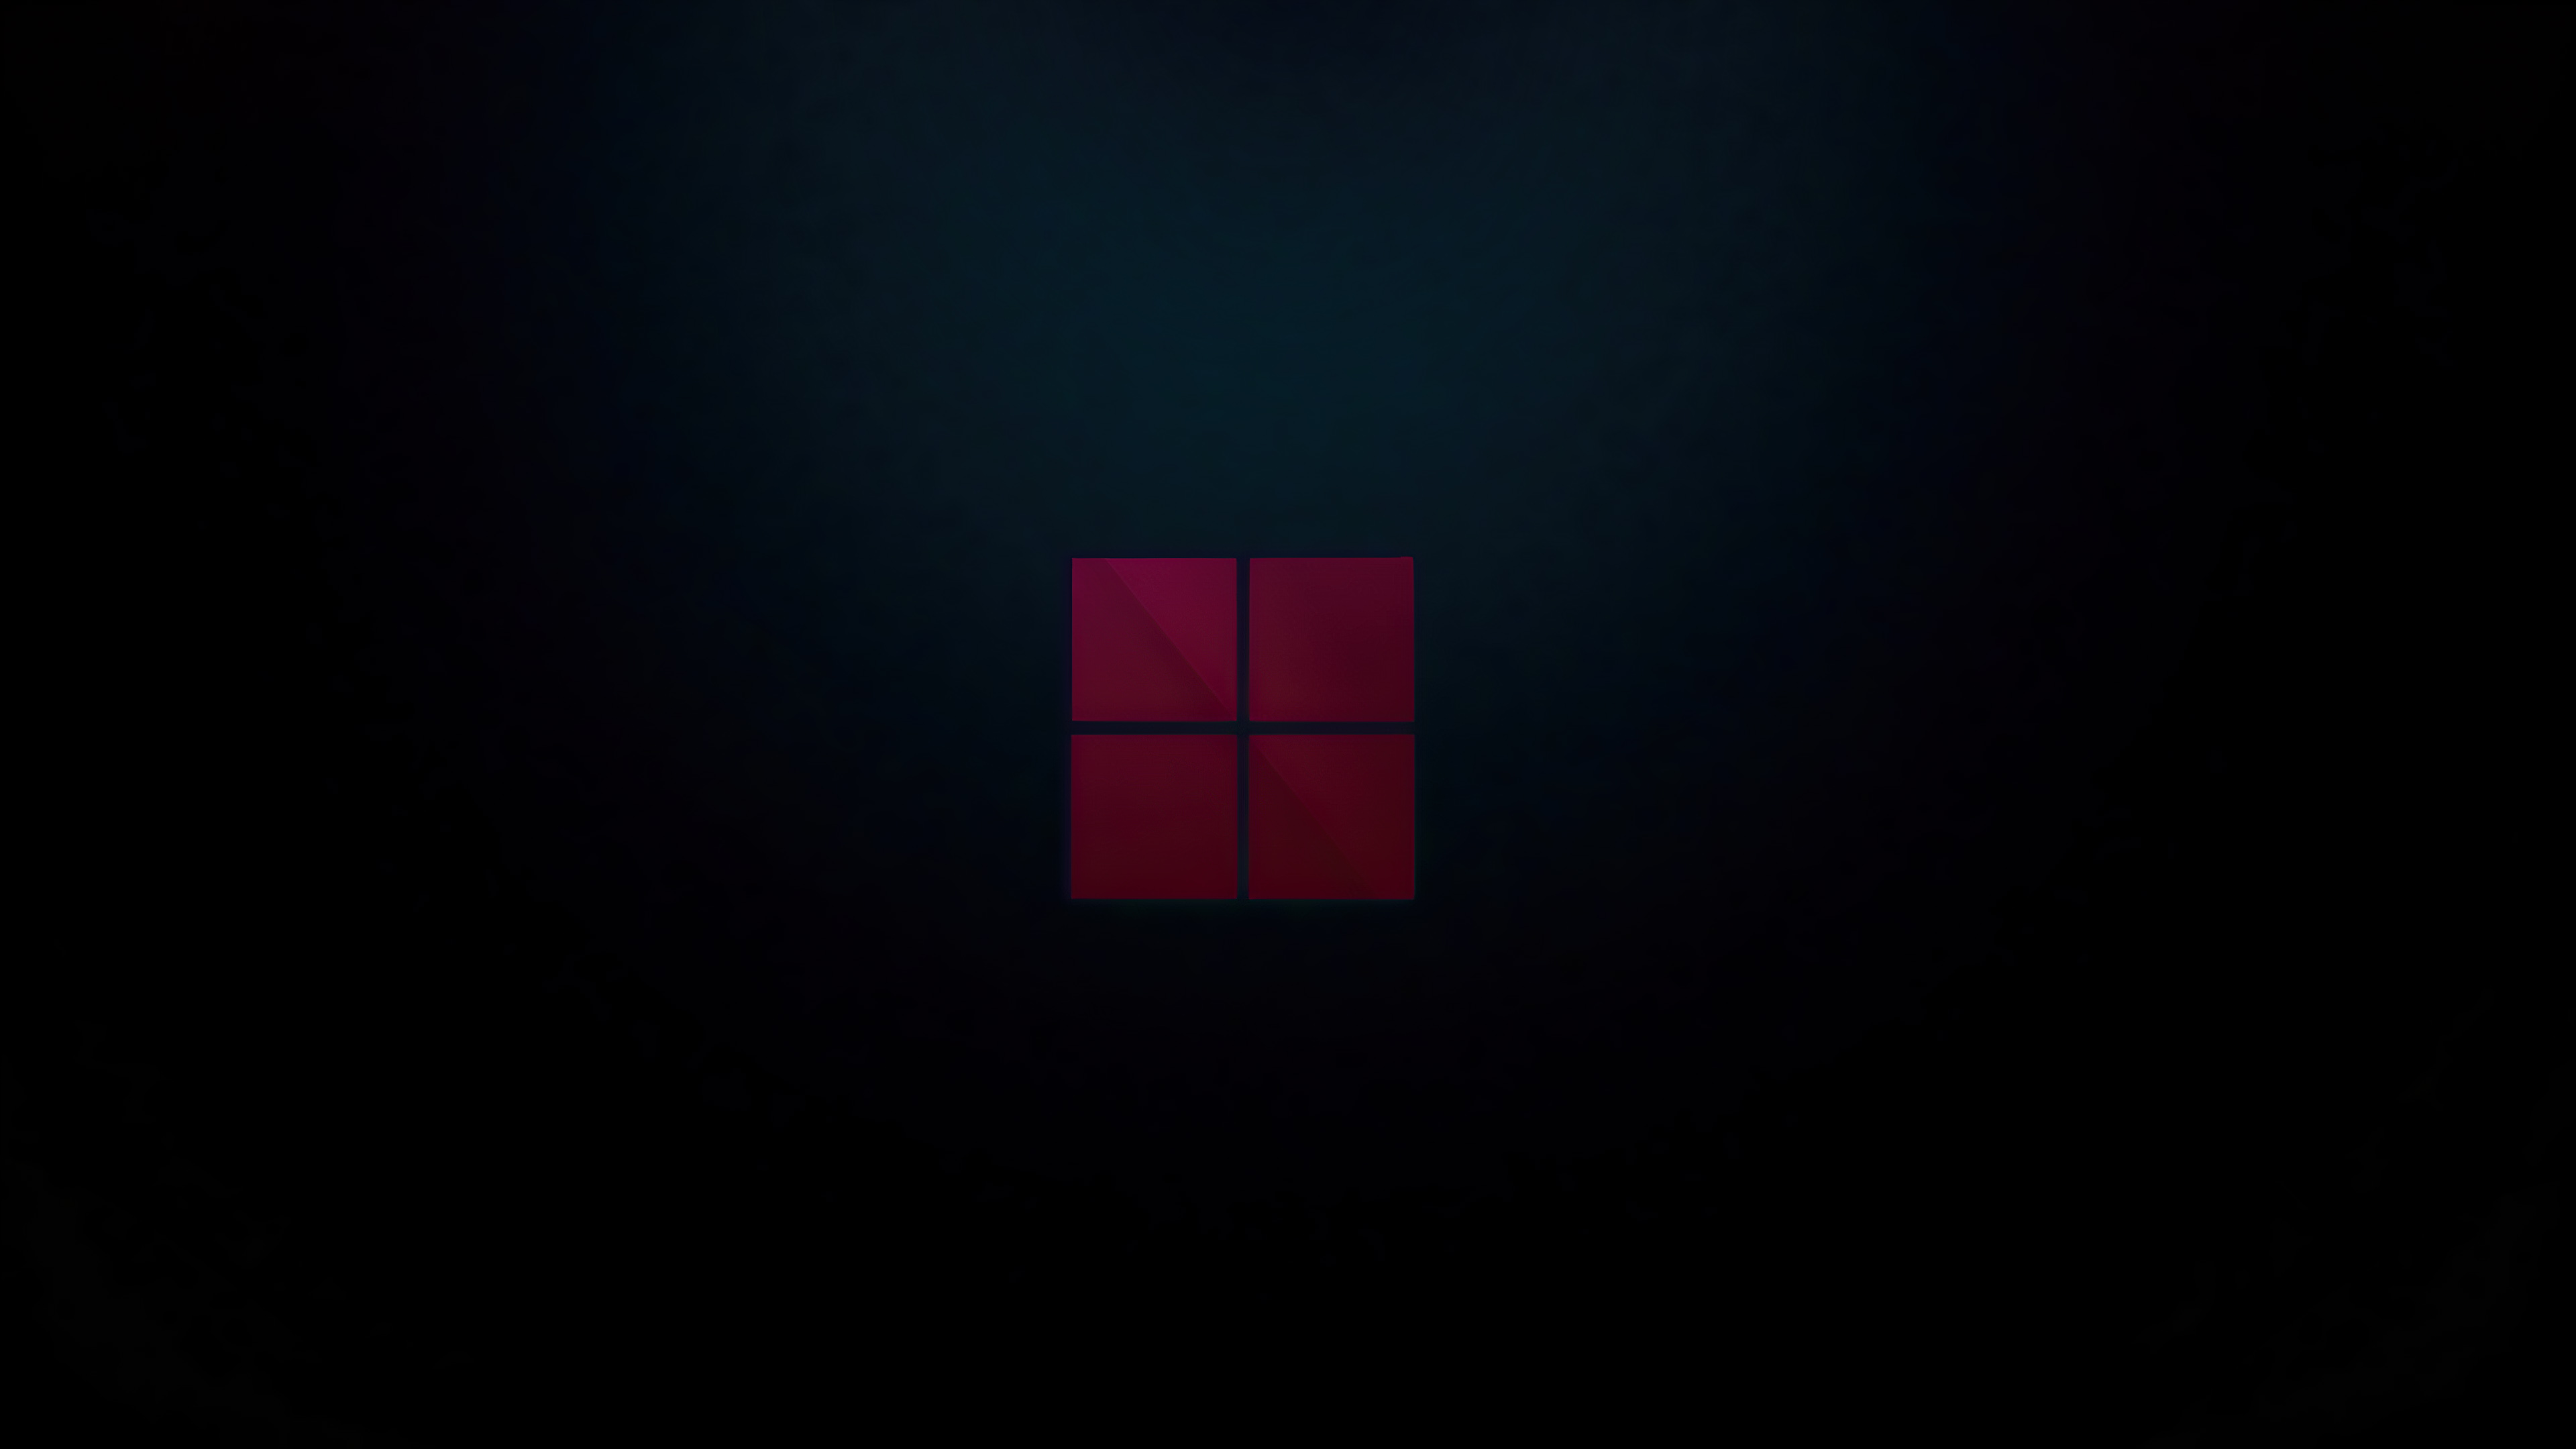 Windows 11 Dark 4k, HD Computer, 4k Wallpapers, Image, Backgrounds, Photos and Pictures